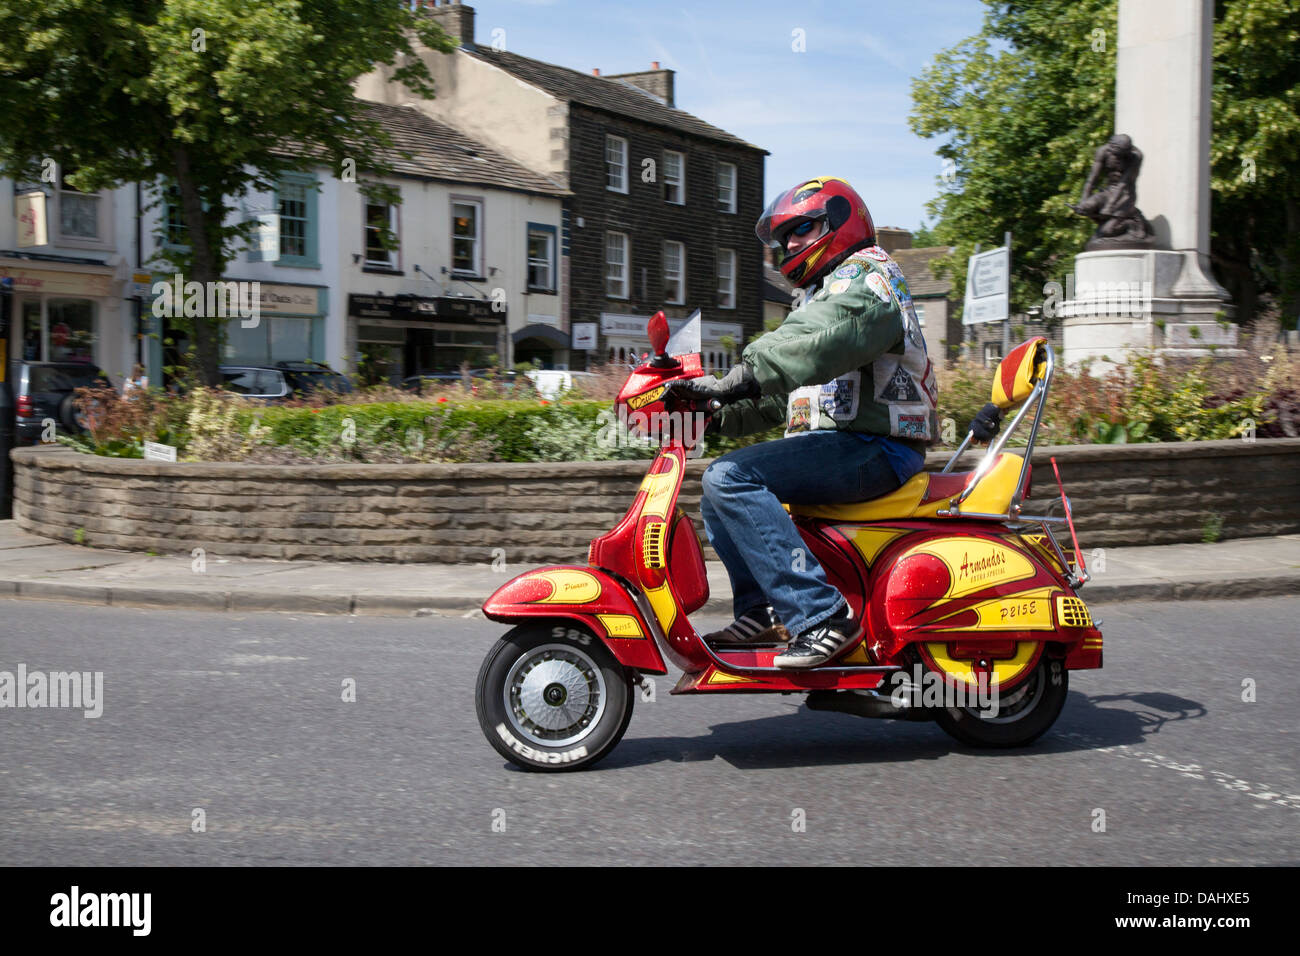 Scooter enthusiast riding his red & yellow custom red & yellow scooter. Scootering classics in the centre of Skipton, North Yorkshire, UK Stock Photo